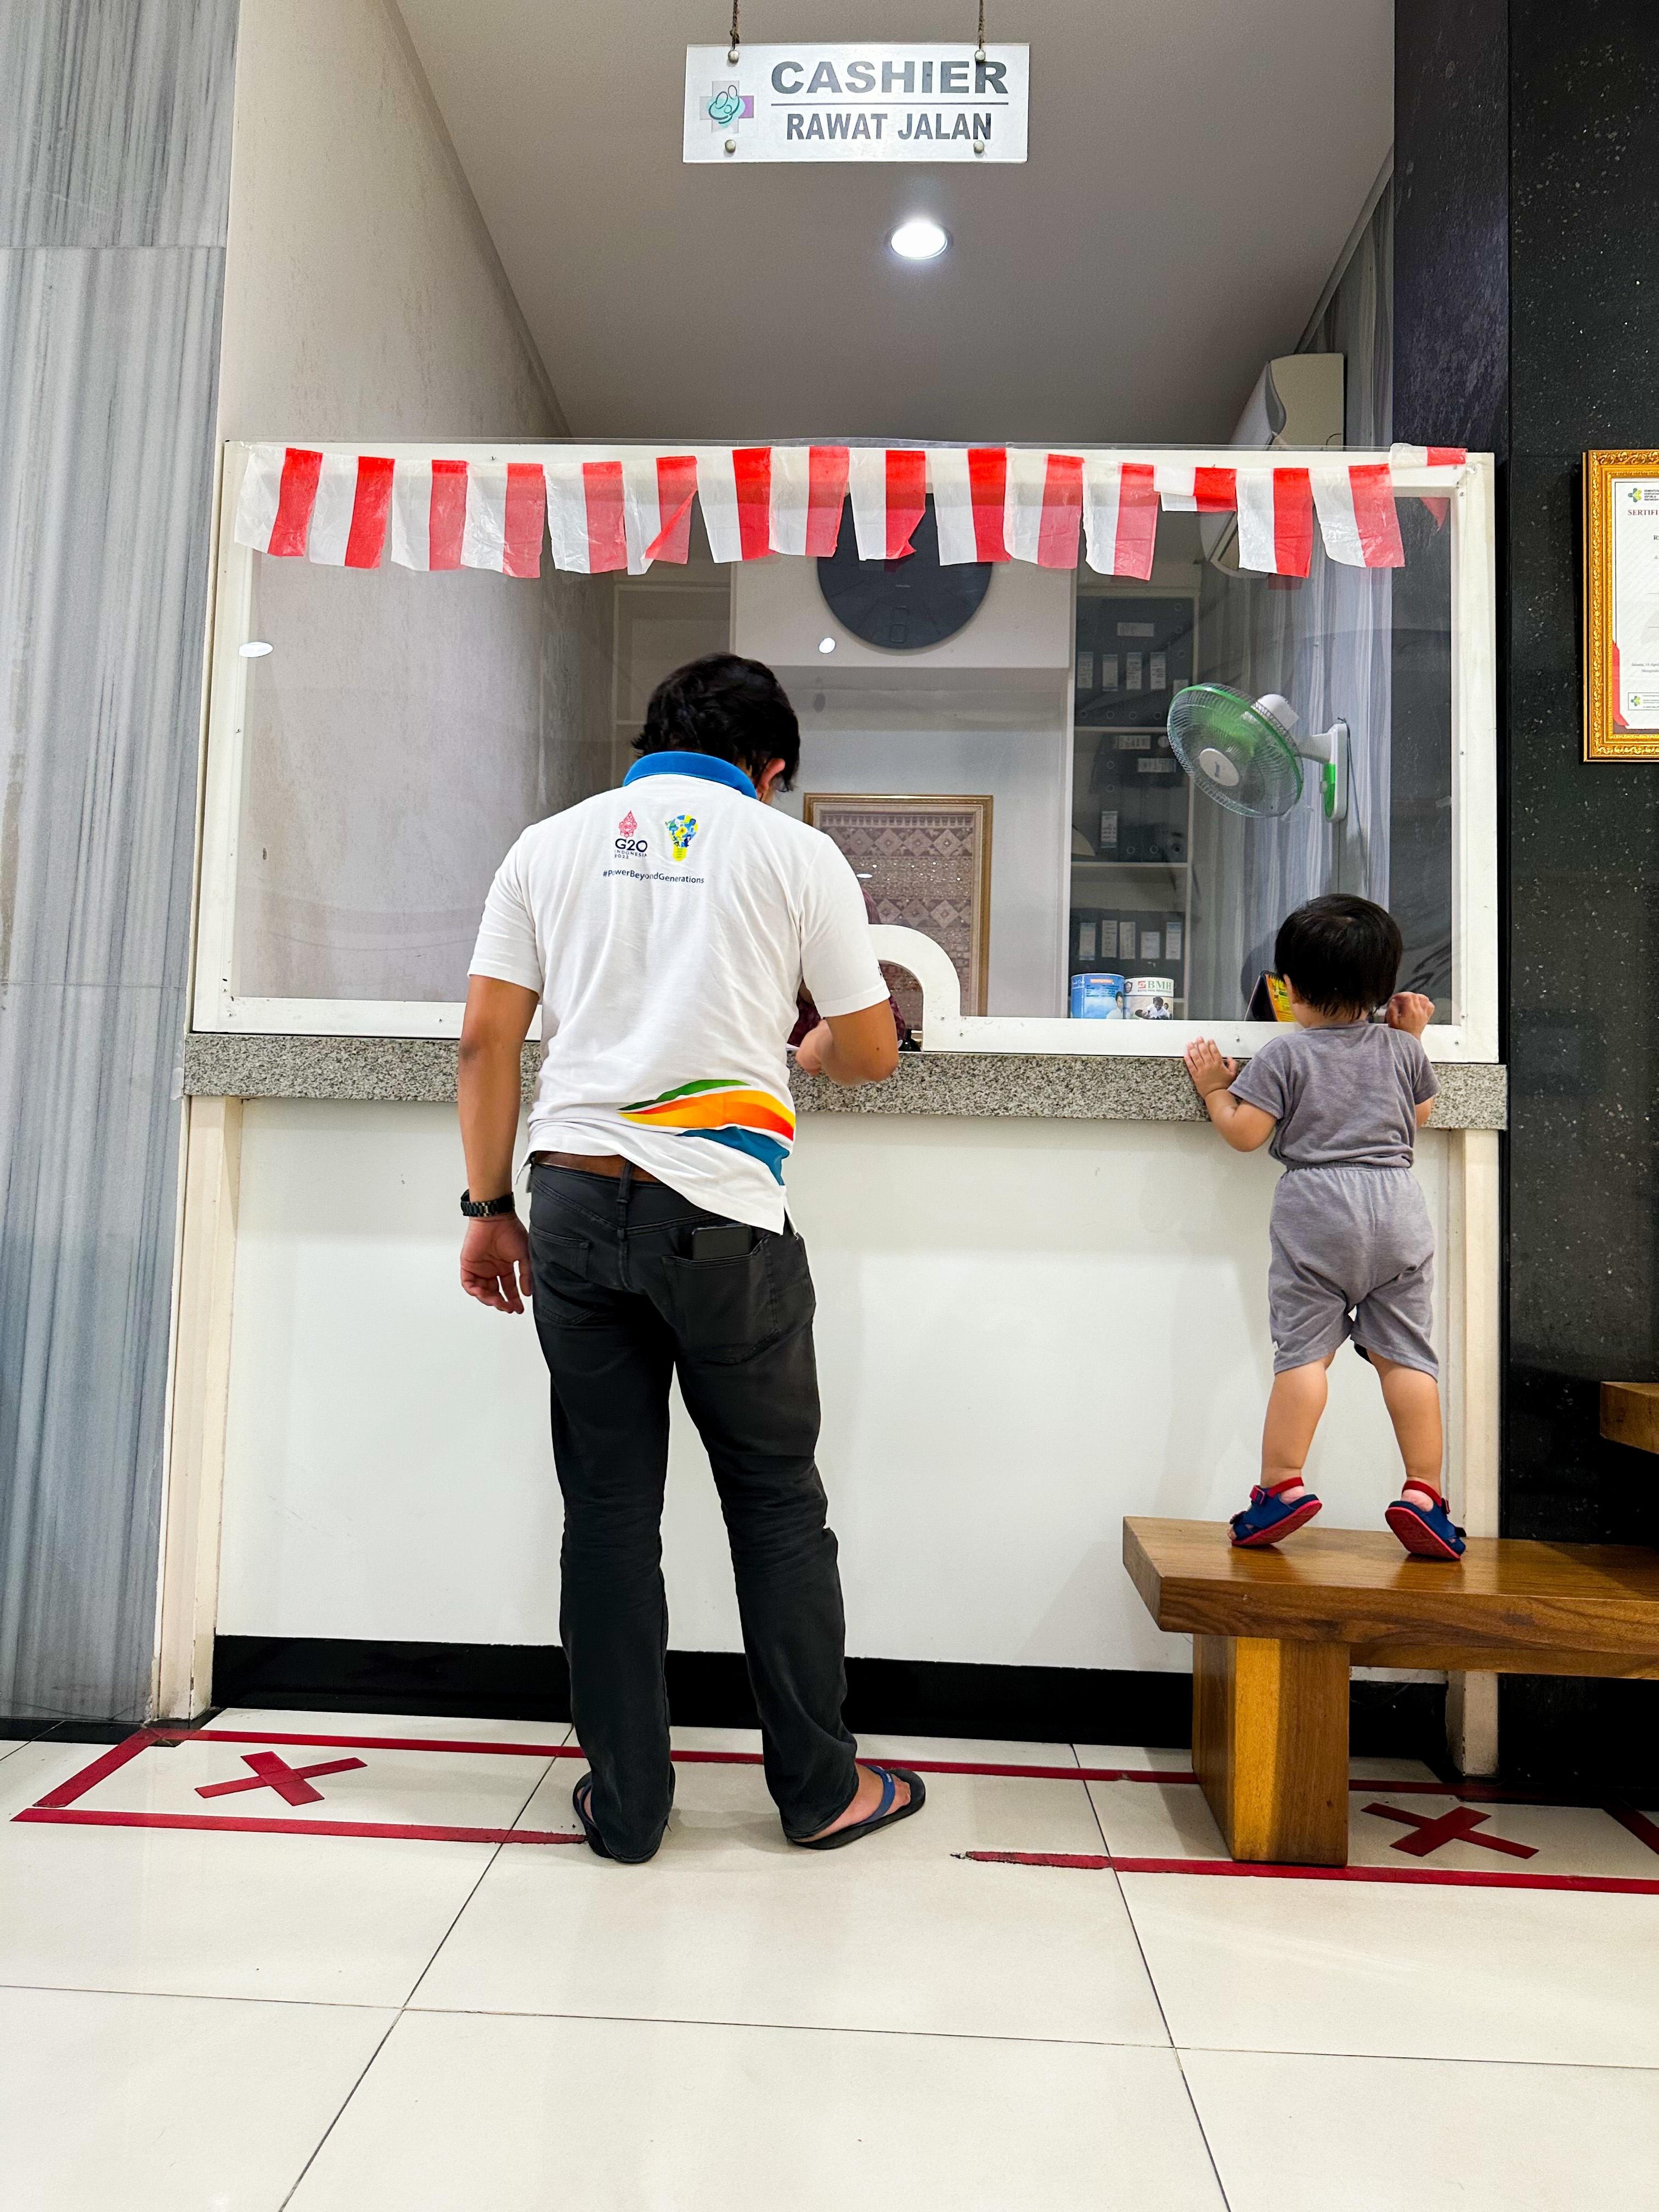 A man standing in front of the cashier with his kid | Source: Shutterstock